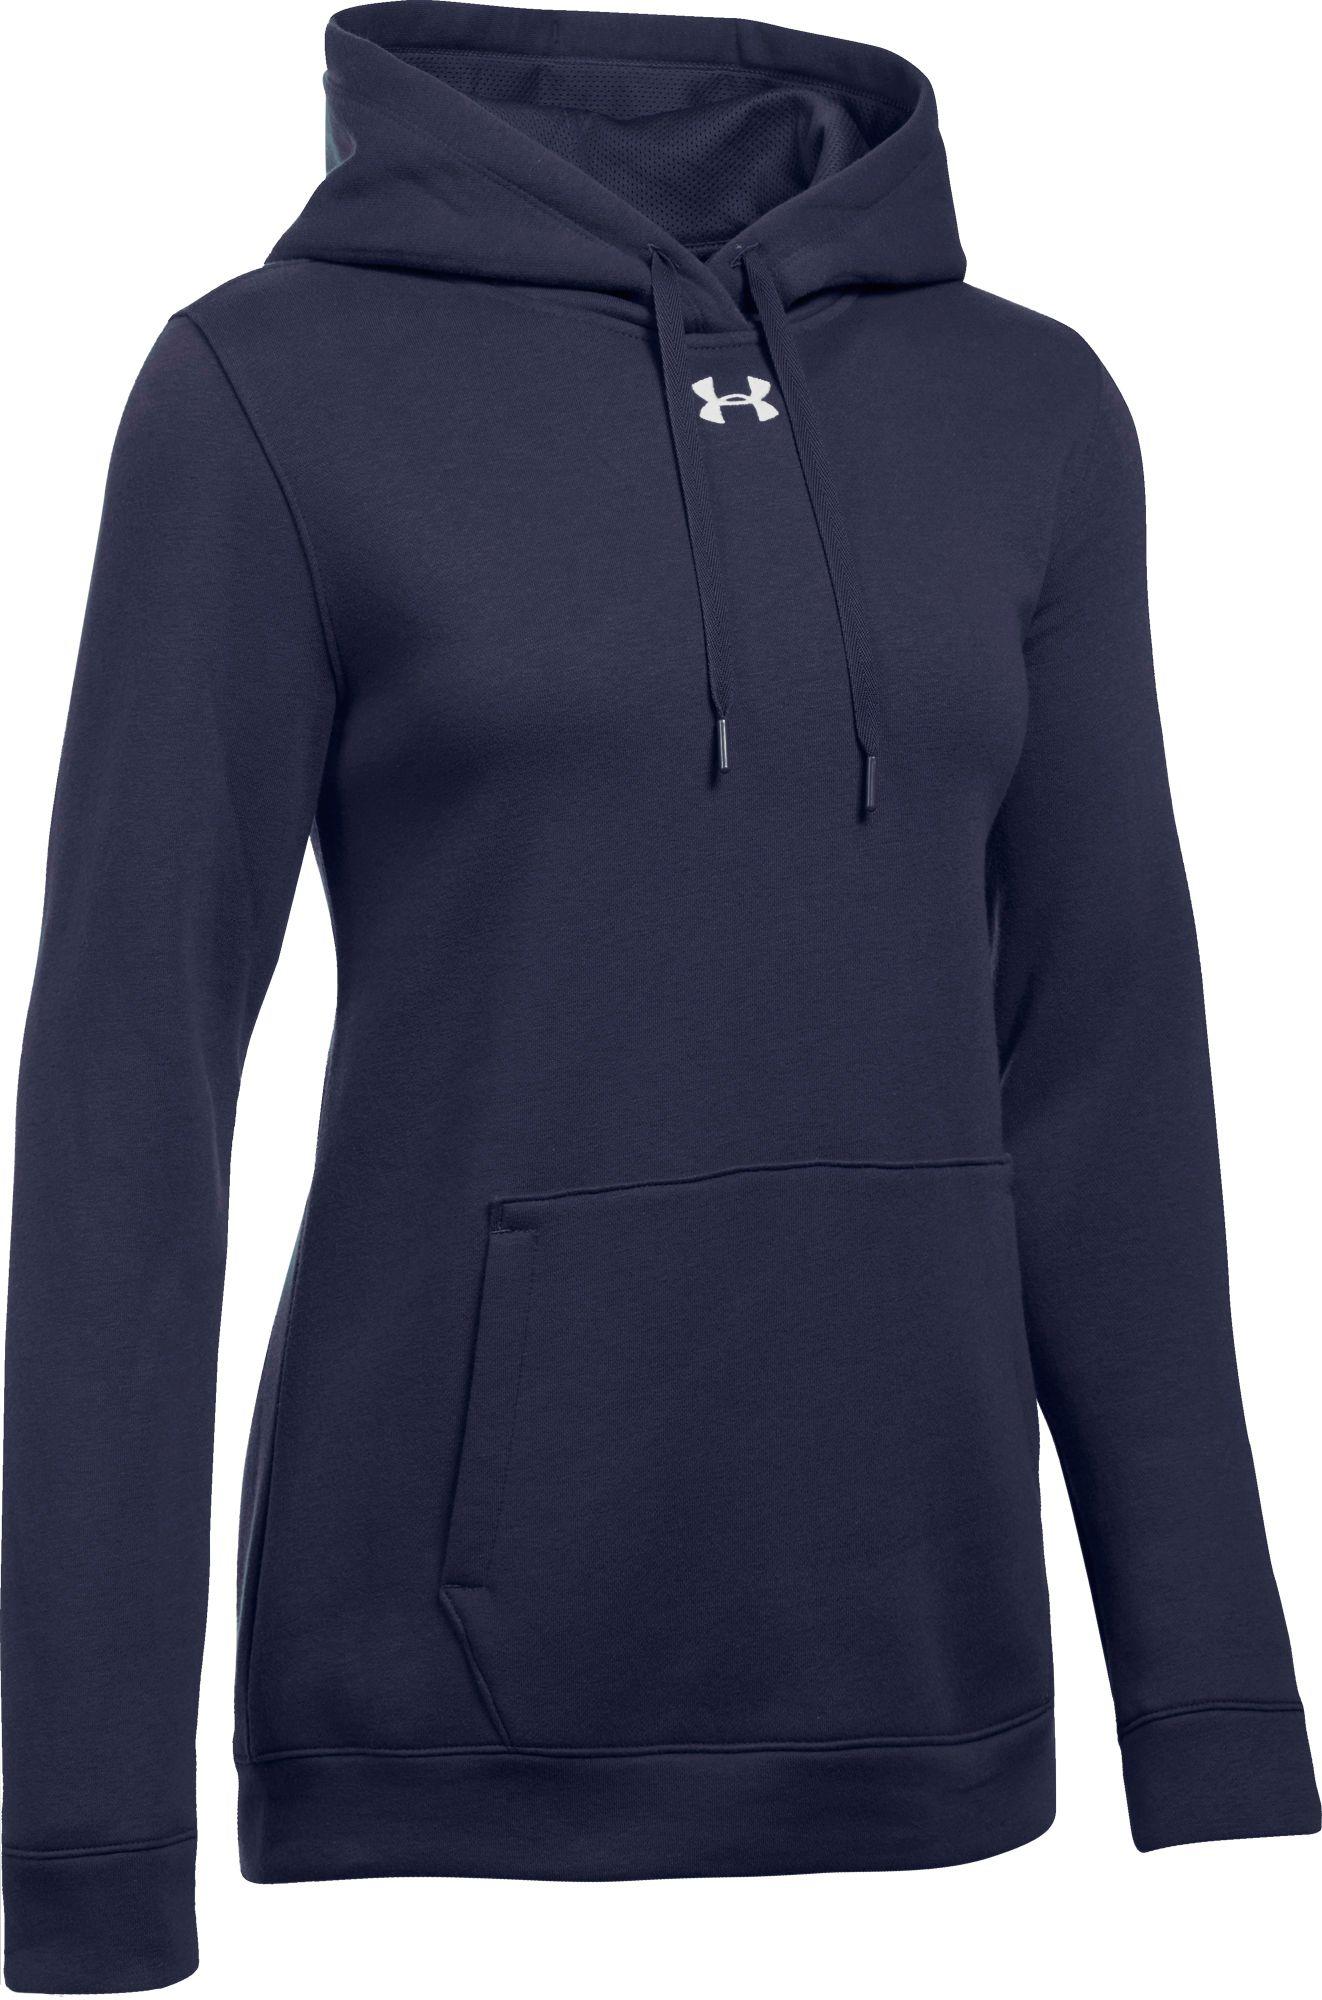 Under Armour Cotton Rival Hoodie in Midnight Navy (Blue) - Lyst